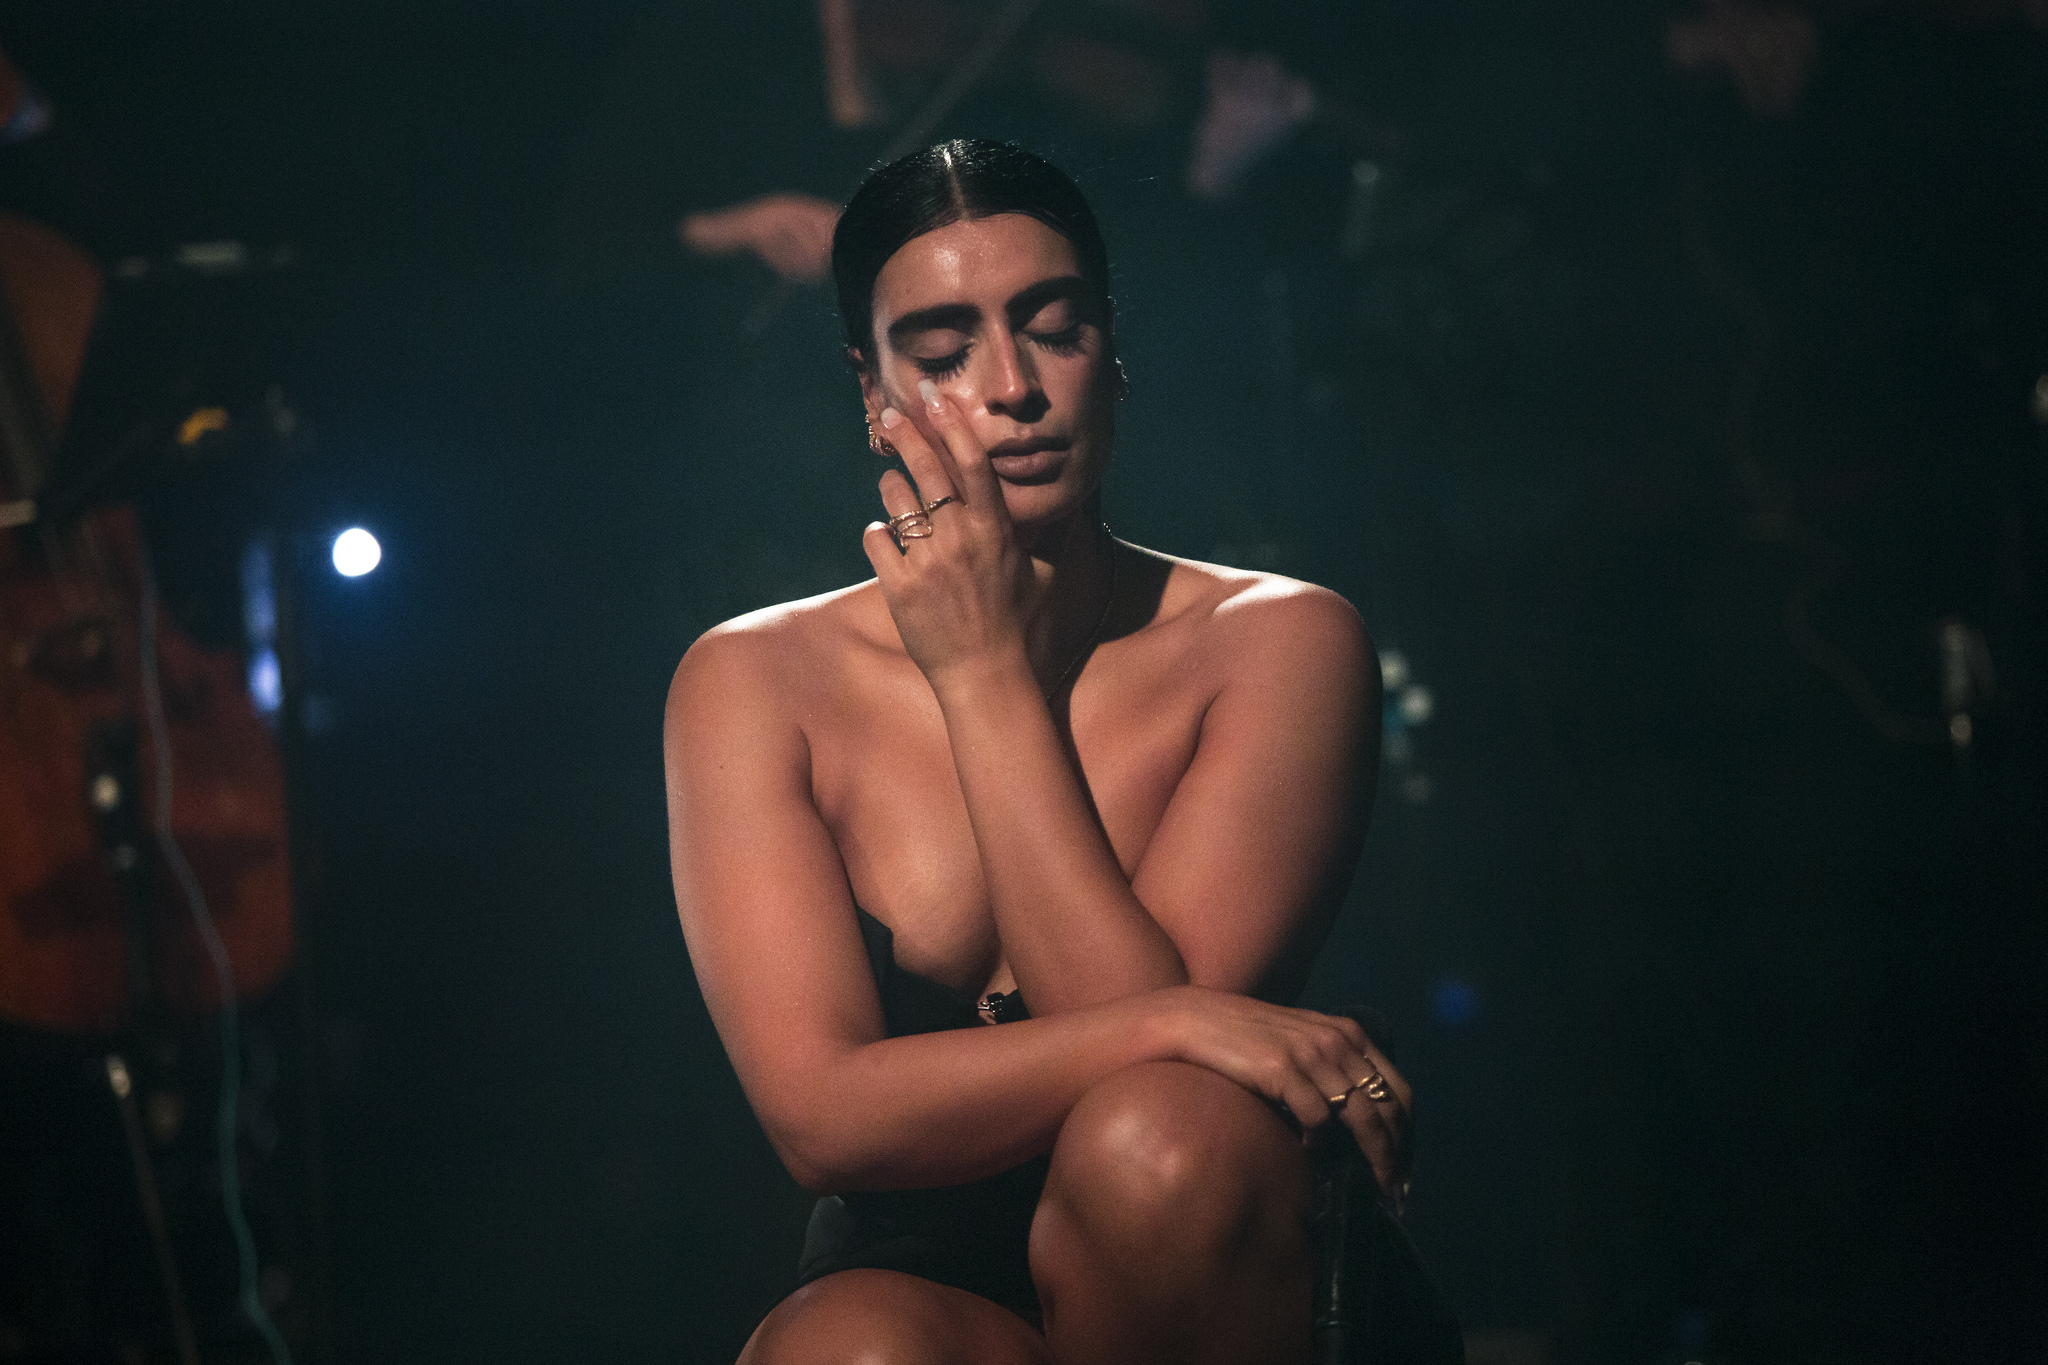 Watch Sevdaliza's full performance at Le Guess Who? 2017